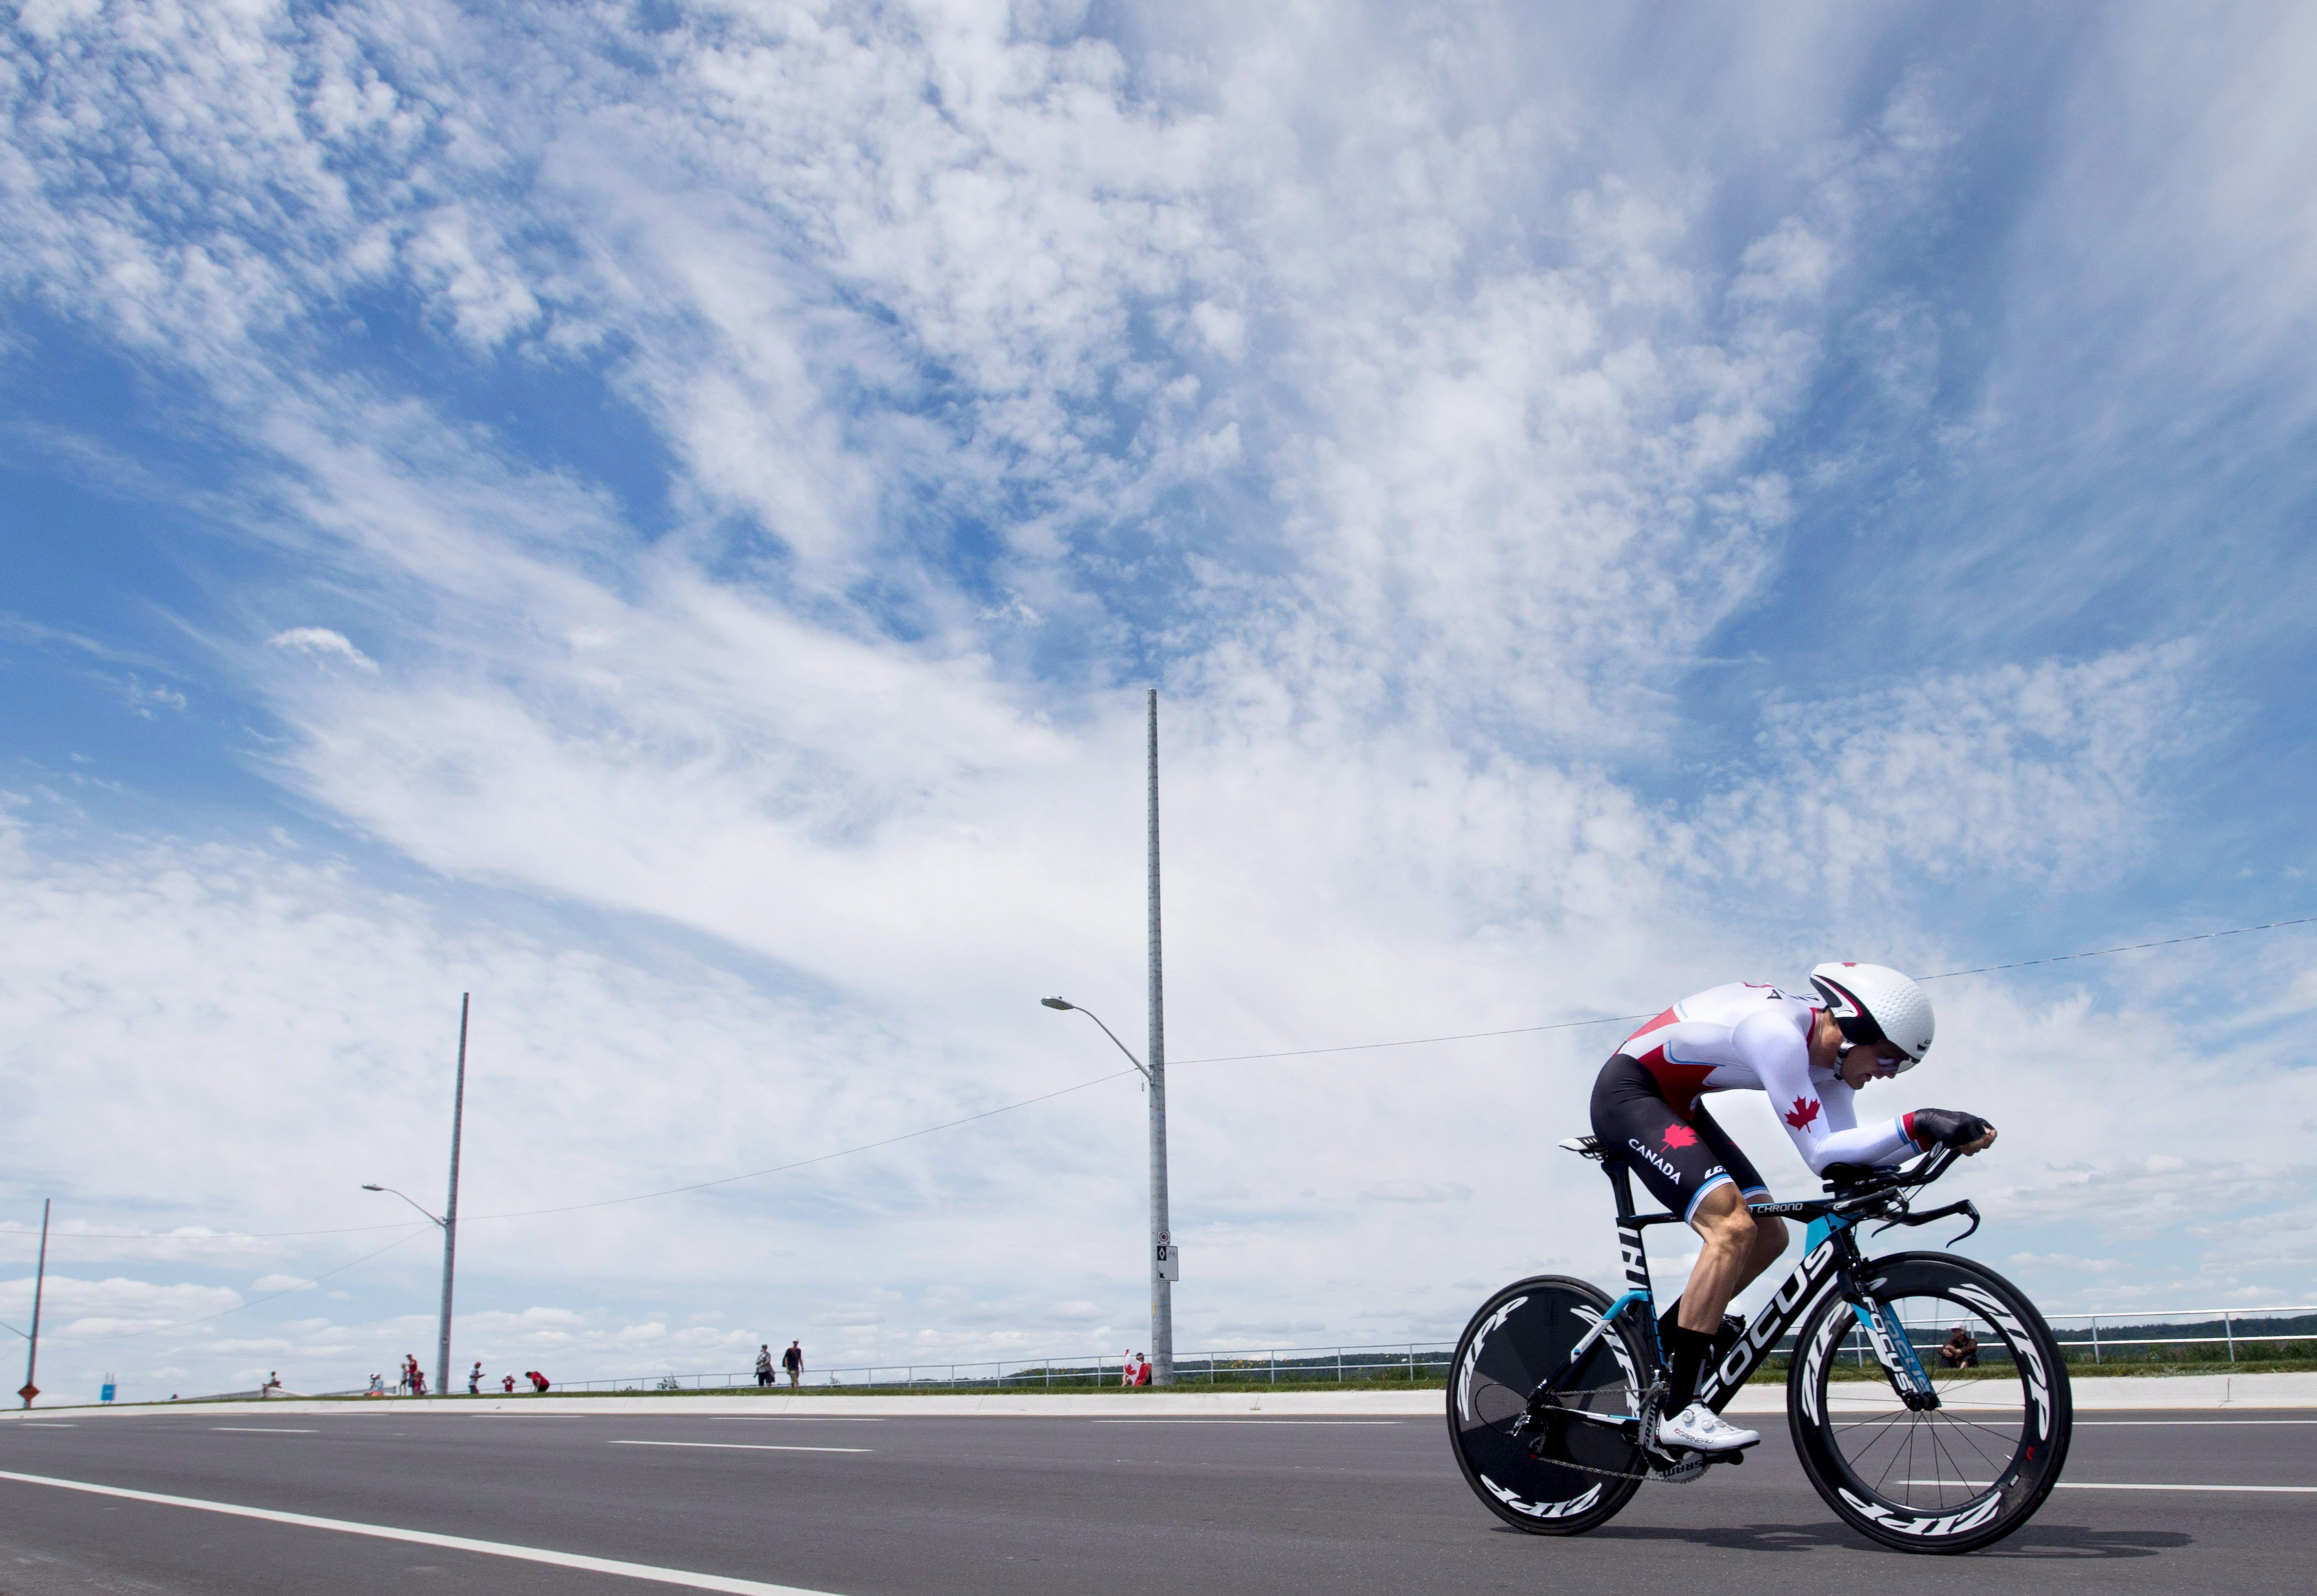 Hugo Houle of Canada rides his way to winning the gold medal in men's individual time trial road cycling at the 2015 Pan Am Games in Milton, Ont. on Wednesday, July 22, 2015. THE CANADIAN PRESS/Darren Calabrese